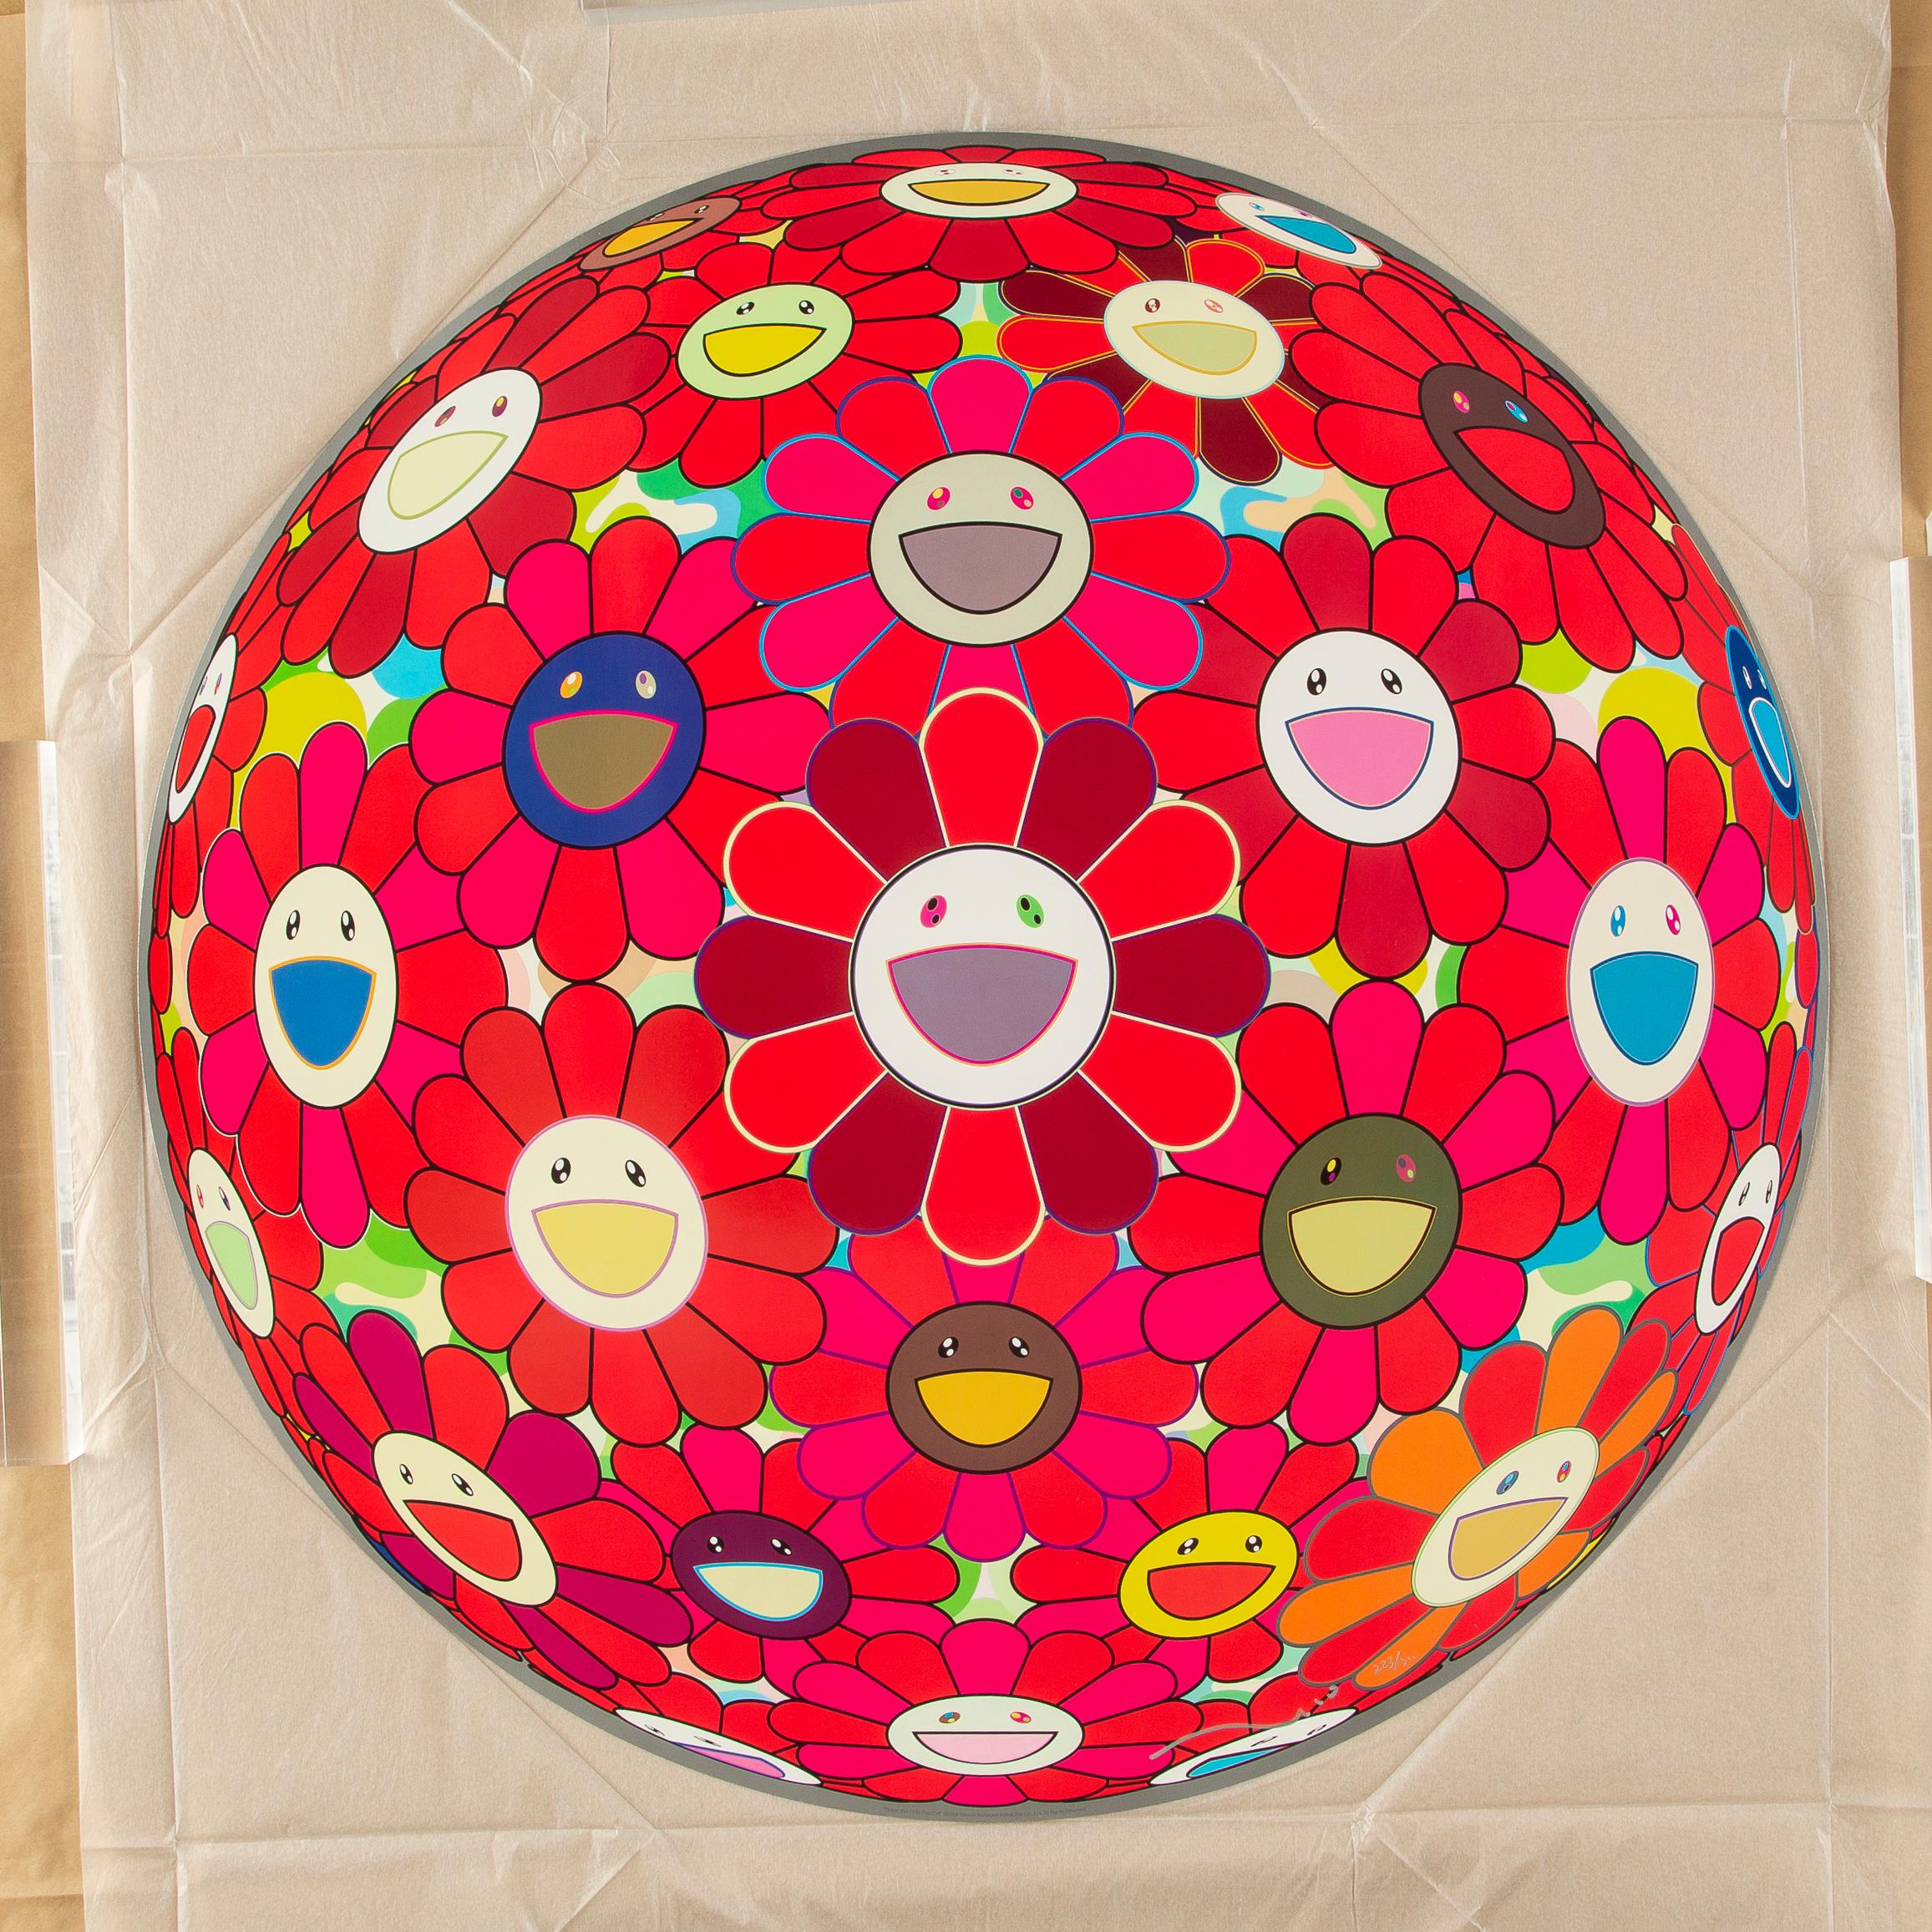 Flower Ball (3-D) Red Cliff Limited Edition (print) by Murakami signed, numbered - Print by Takashi Murakami